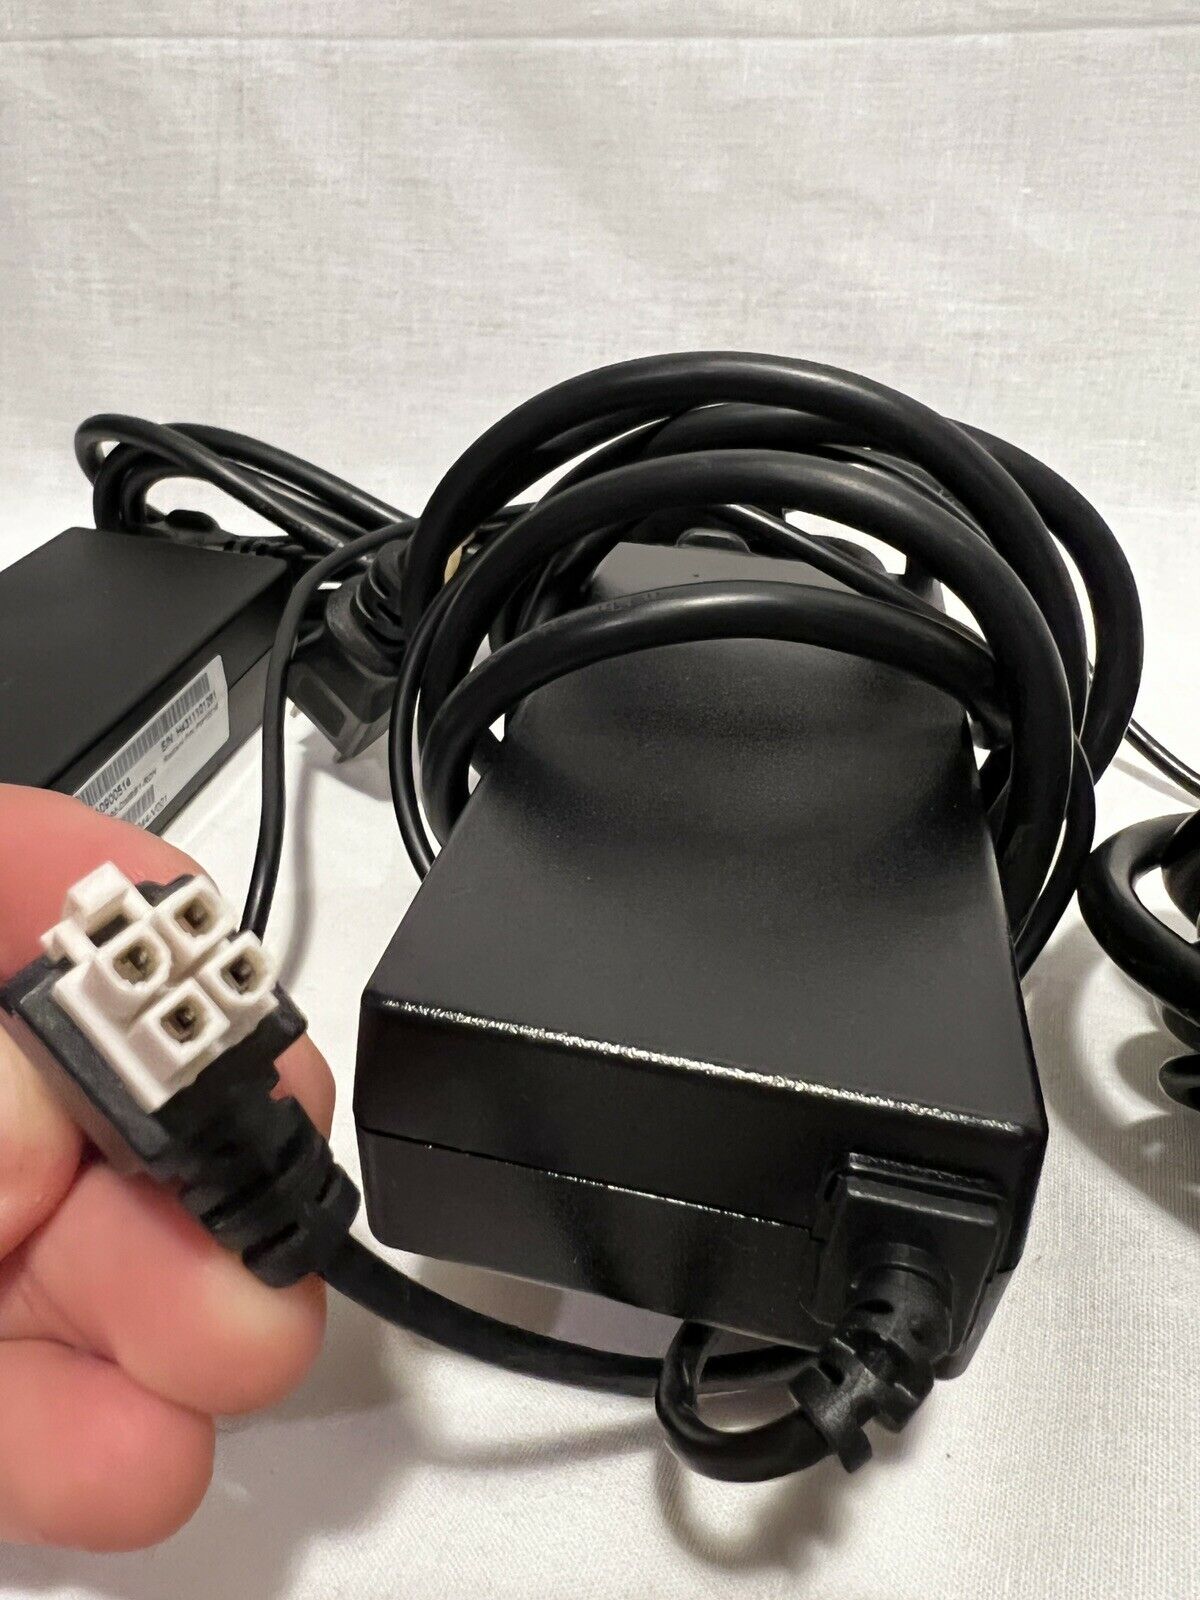 FSP Group Model:FSP090-DMBB1 AC/DC Adapter 4 Pin 19V 4.74A Brand: FSP Connectors: 6+6 Pin Non-Domestic Product: No